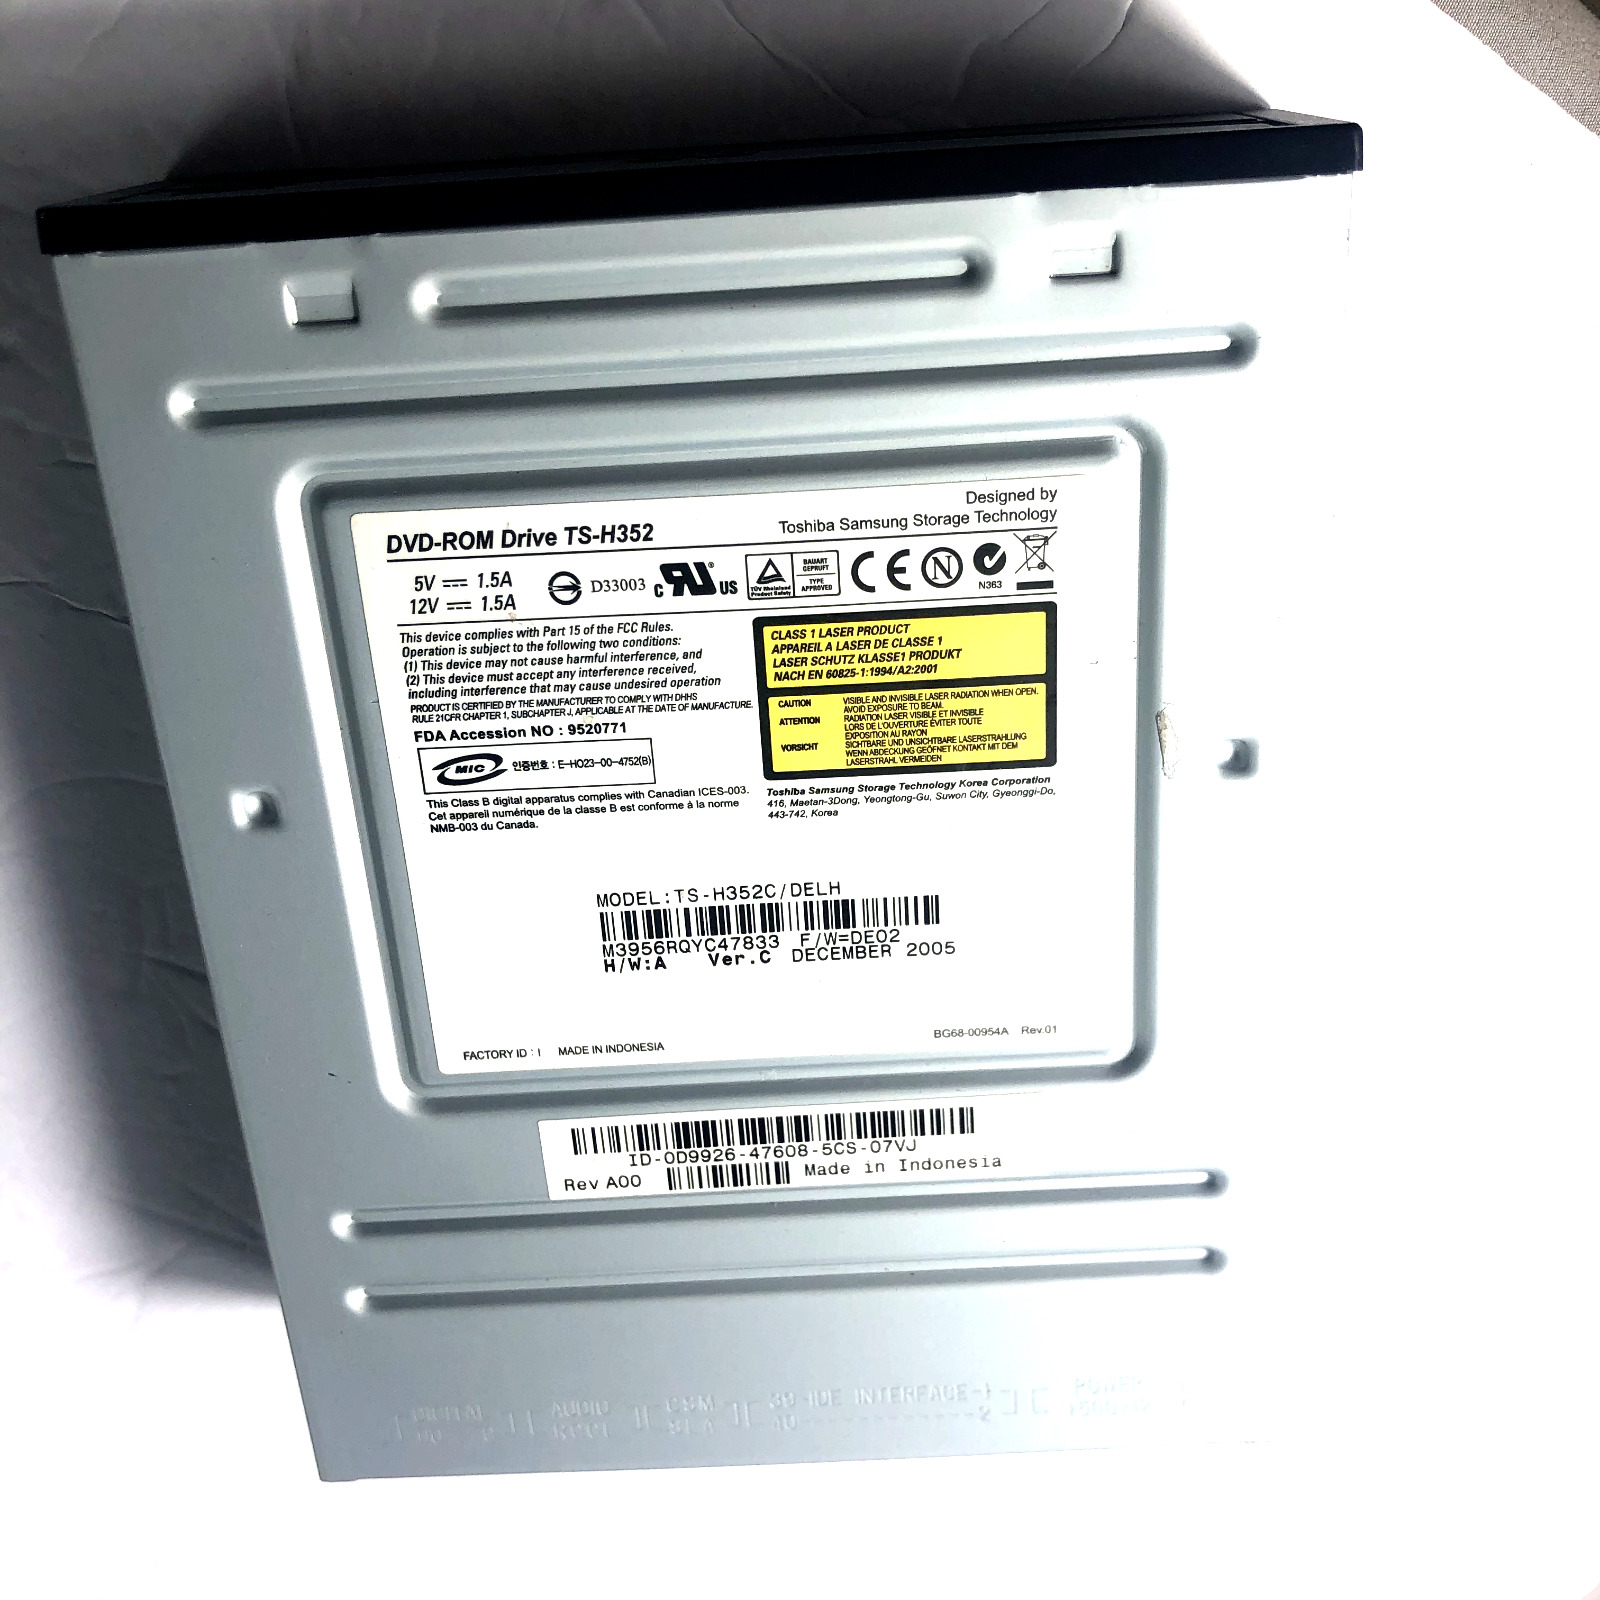 Toshiba Samsung Storage DVD Rom Drive TS H352 untested may be new